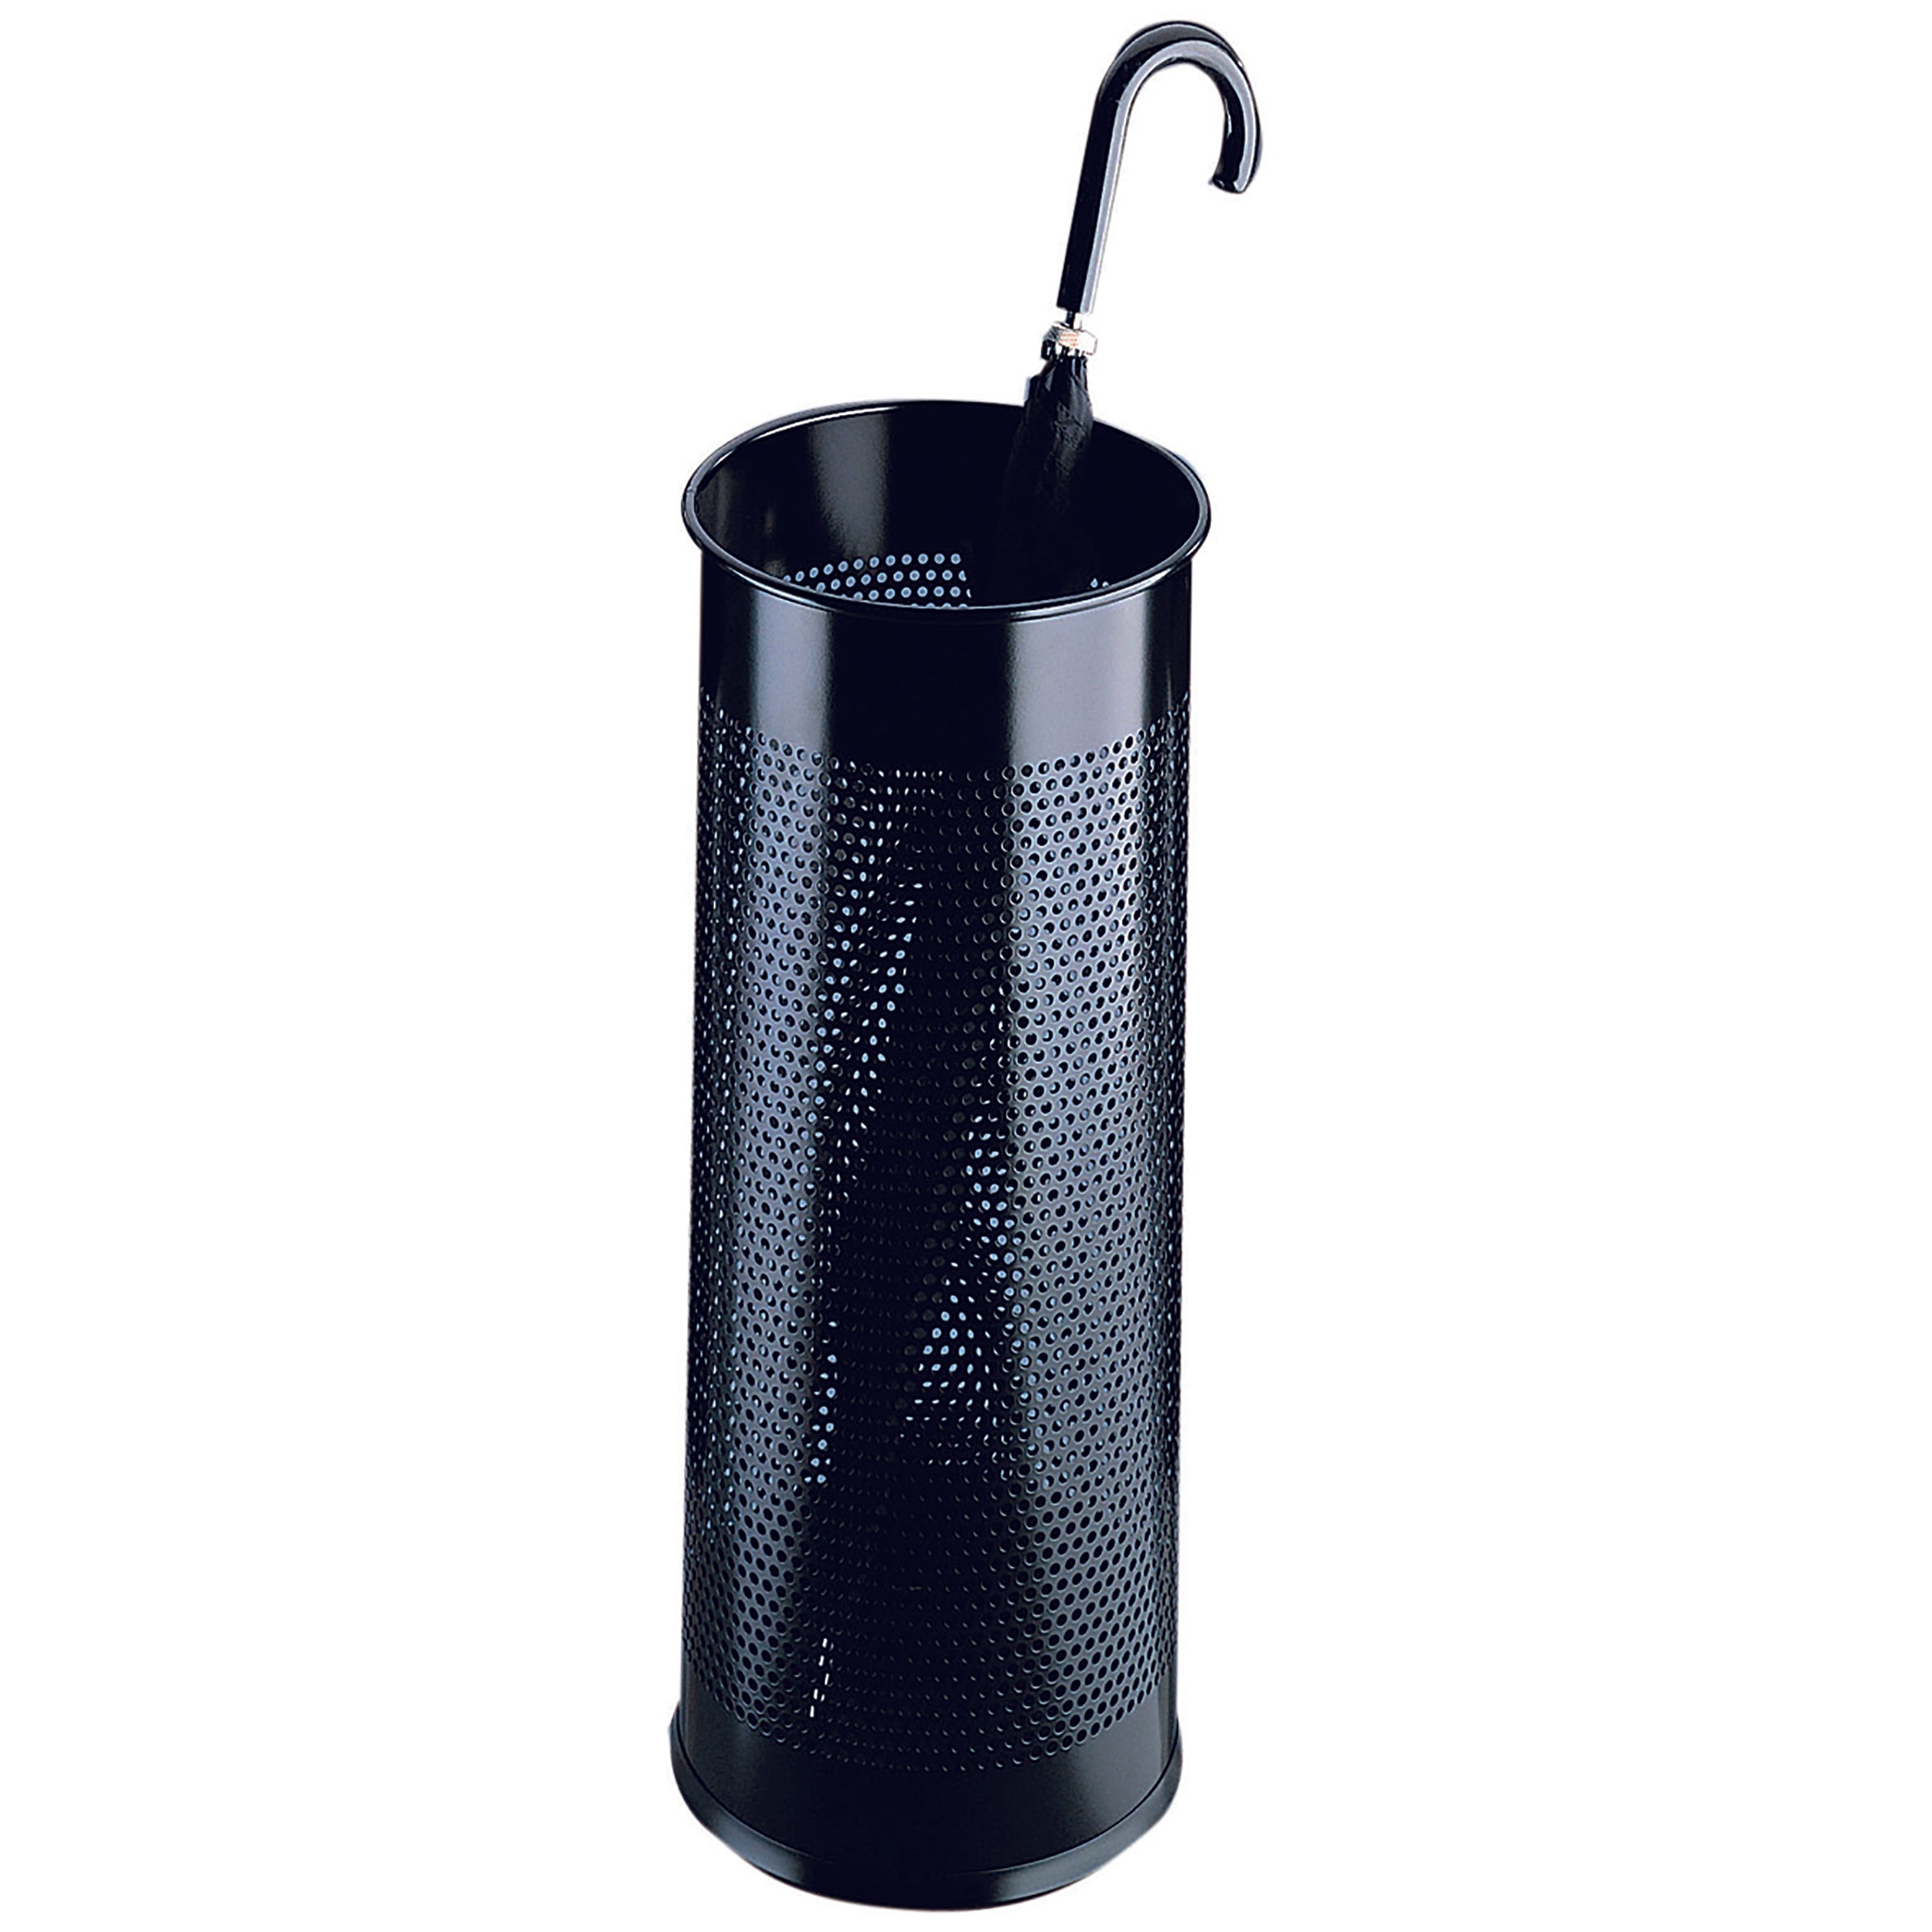 Black stainless steel umbrella holder with decorative perforations..